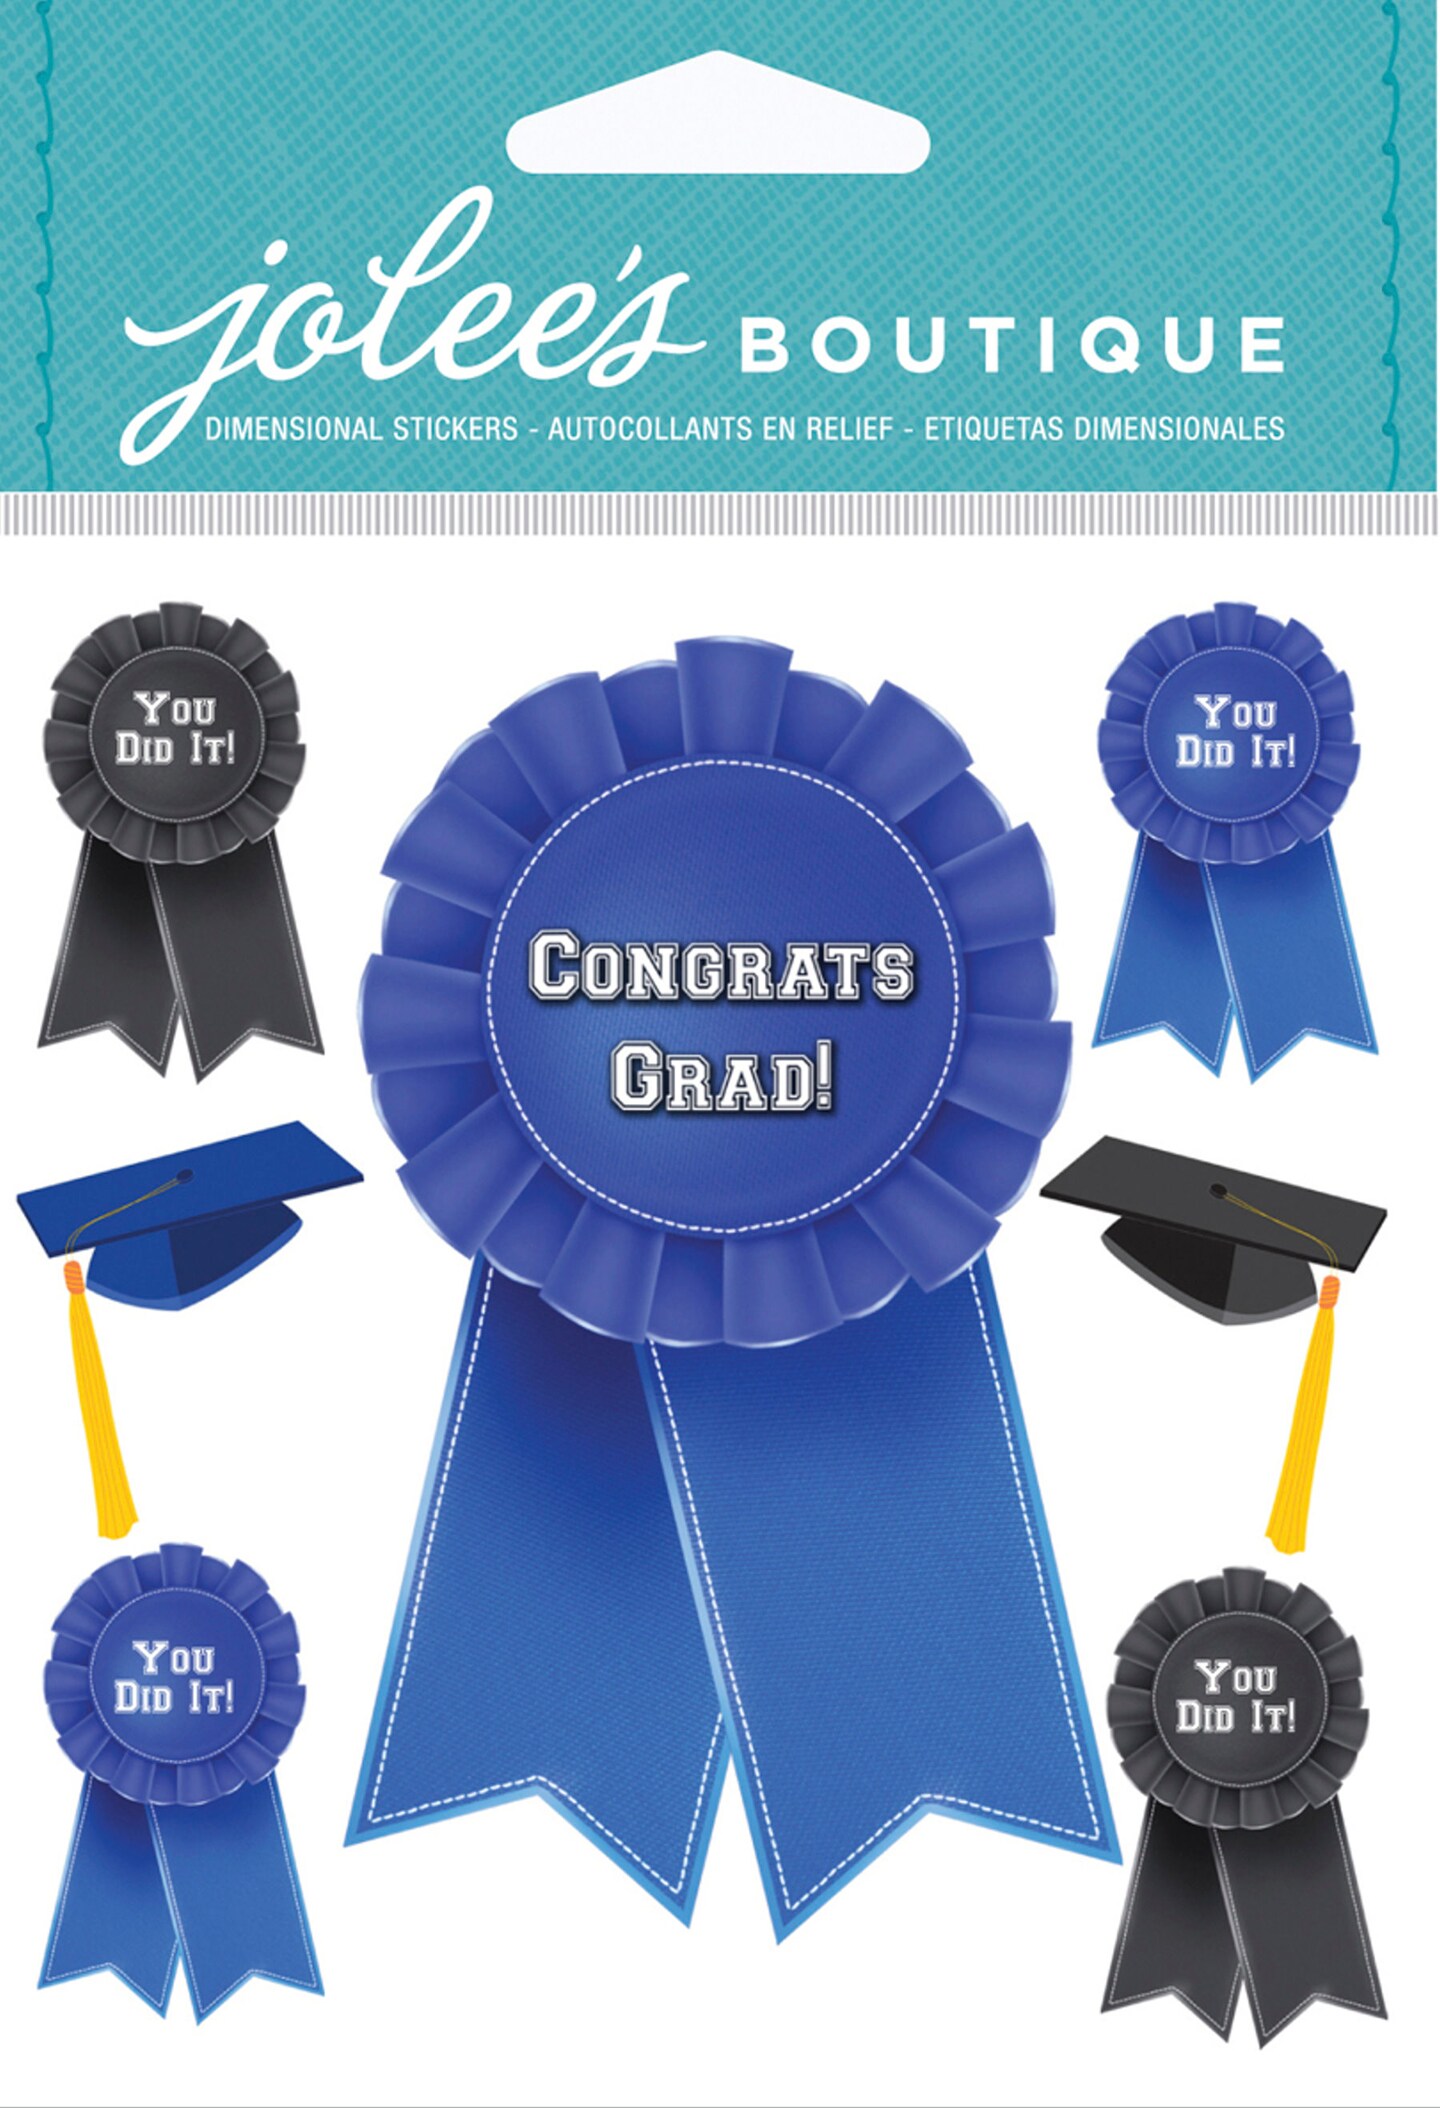 Jolee's Boutique Graduation Caps And Ribbons Dimensional Stickers ...